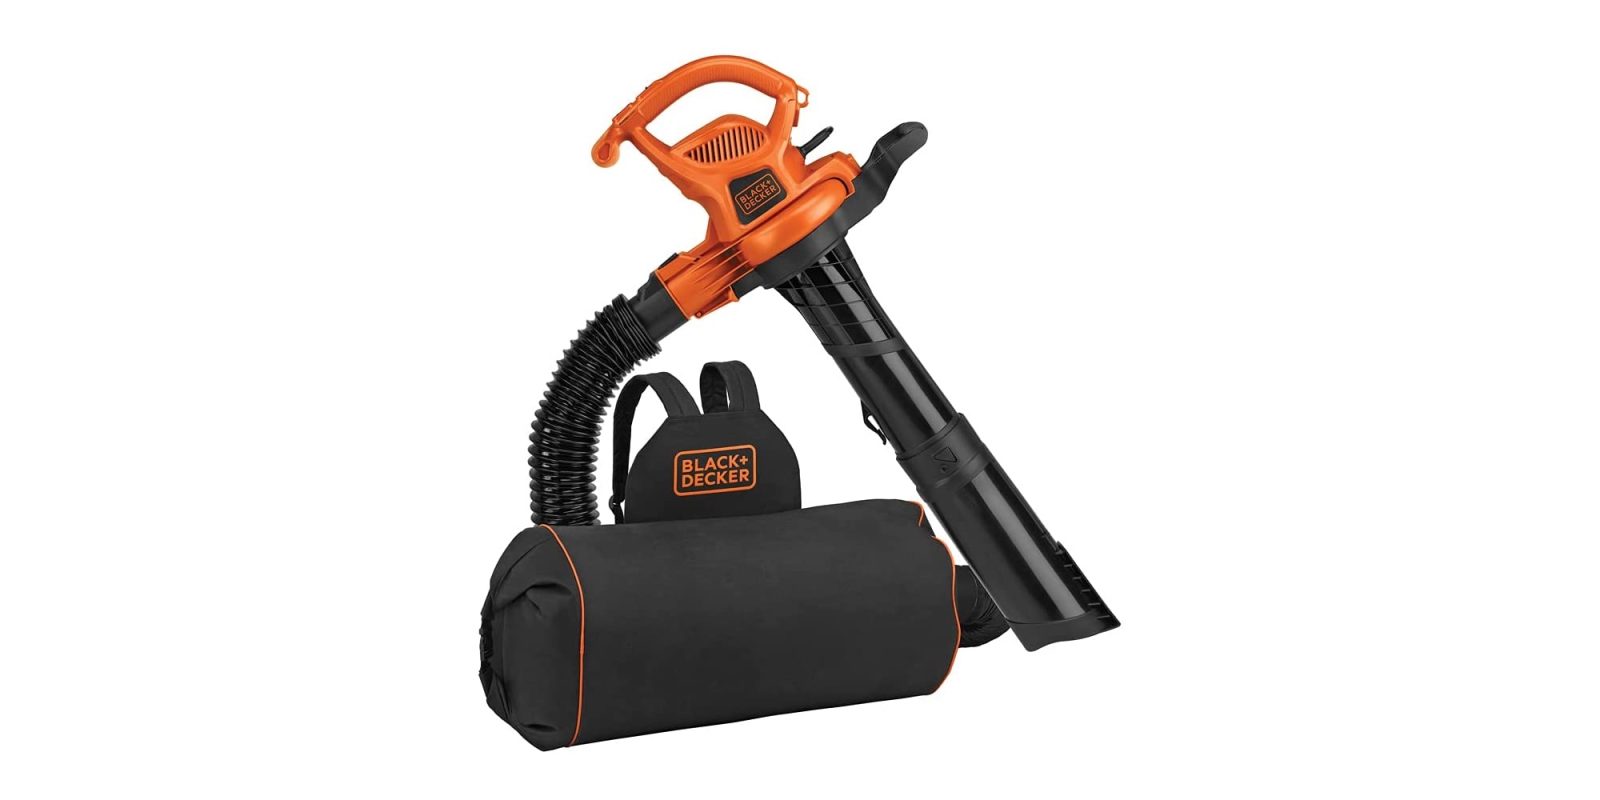 Black & Decker Deals and Promo Codes - 9to5Toys